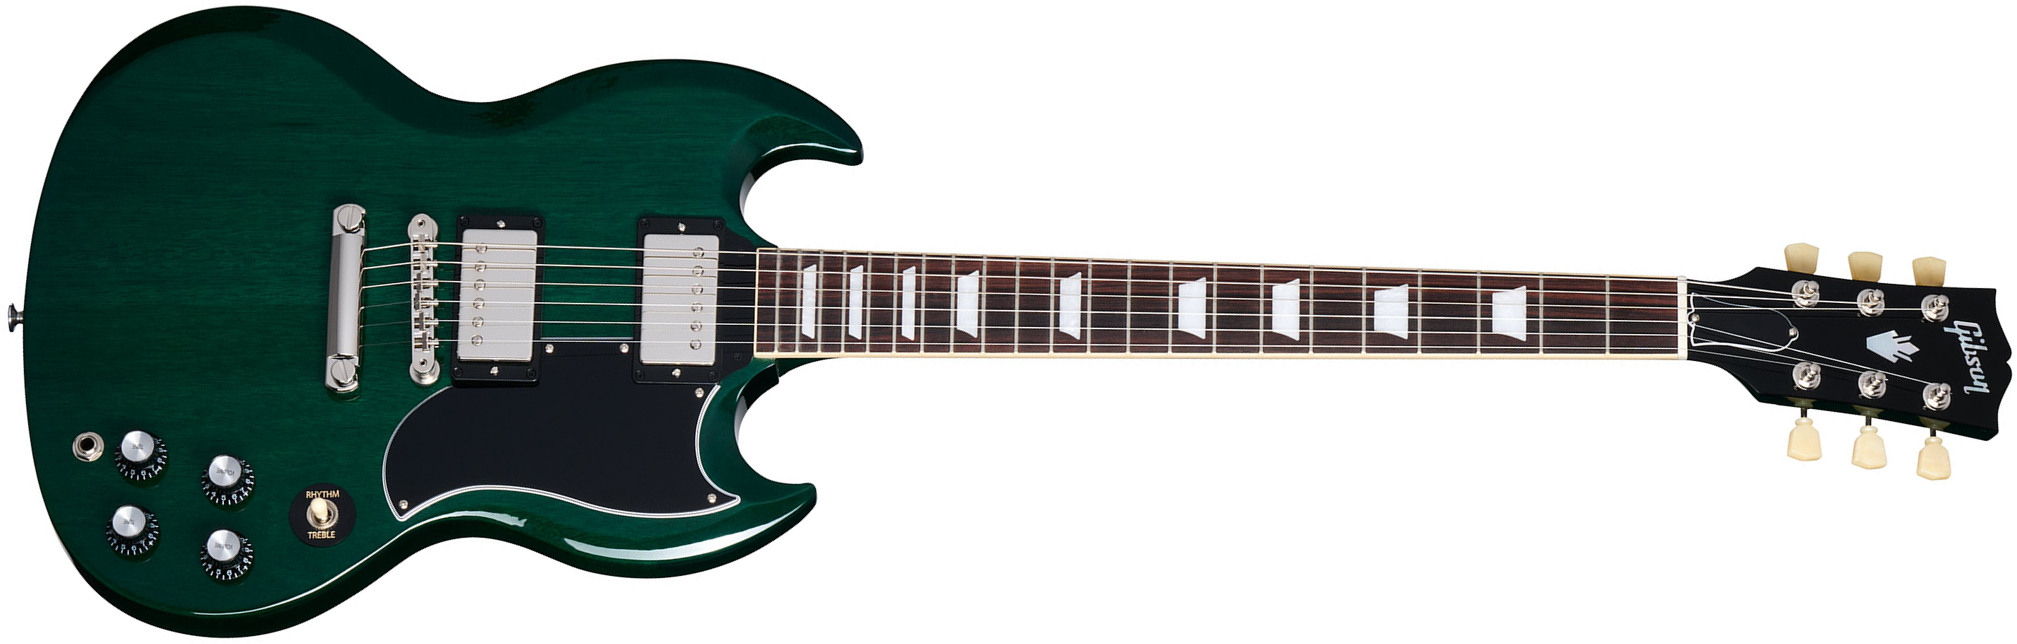 Gibson Sg Standard 1961 Custom Color 2h Ht Rw - Translucent Teal - Double cut electric guitar - Main picture